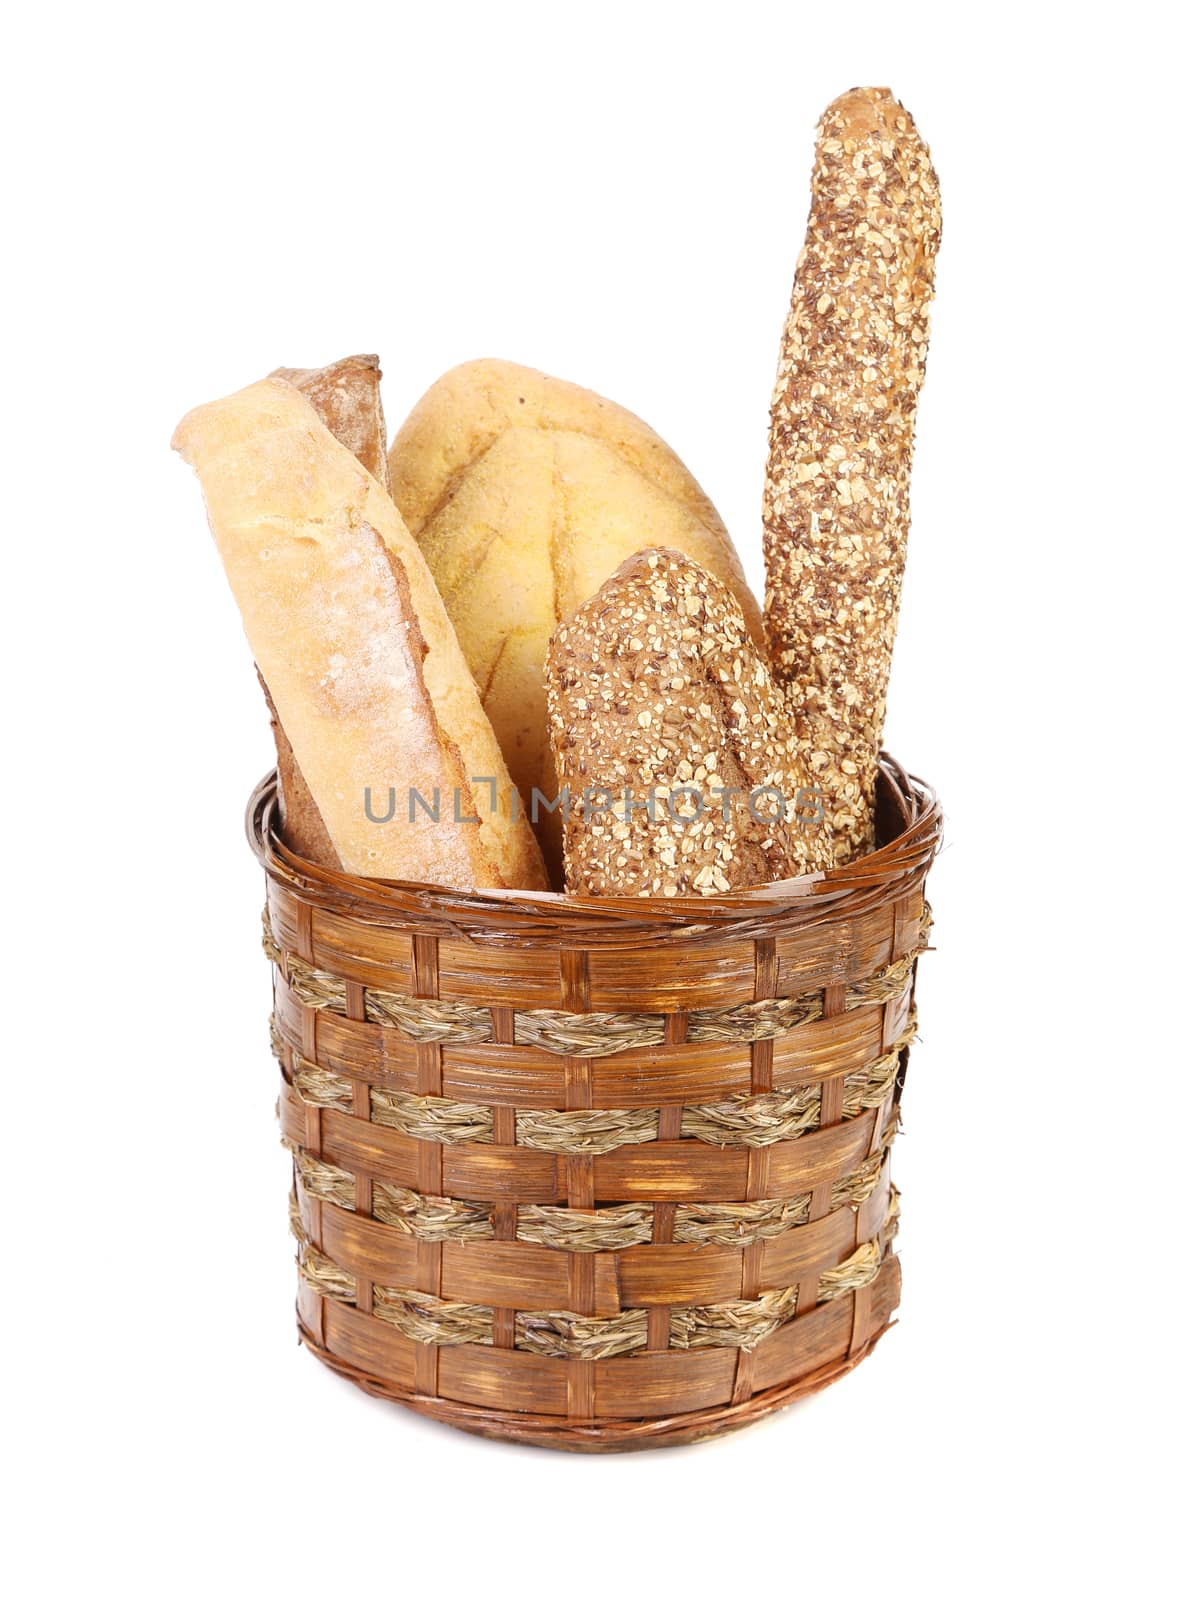 Composition with bread and rolls. by indigolotos